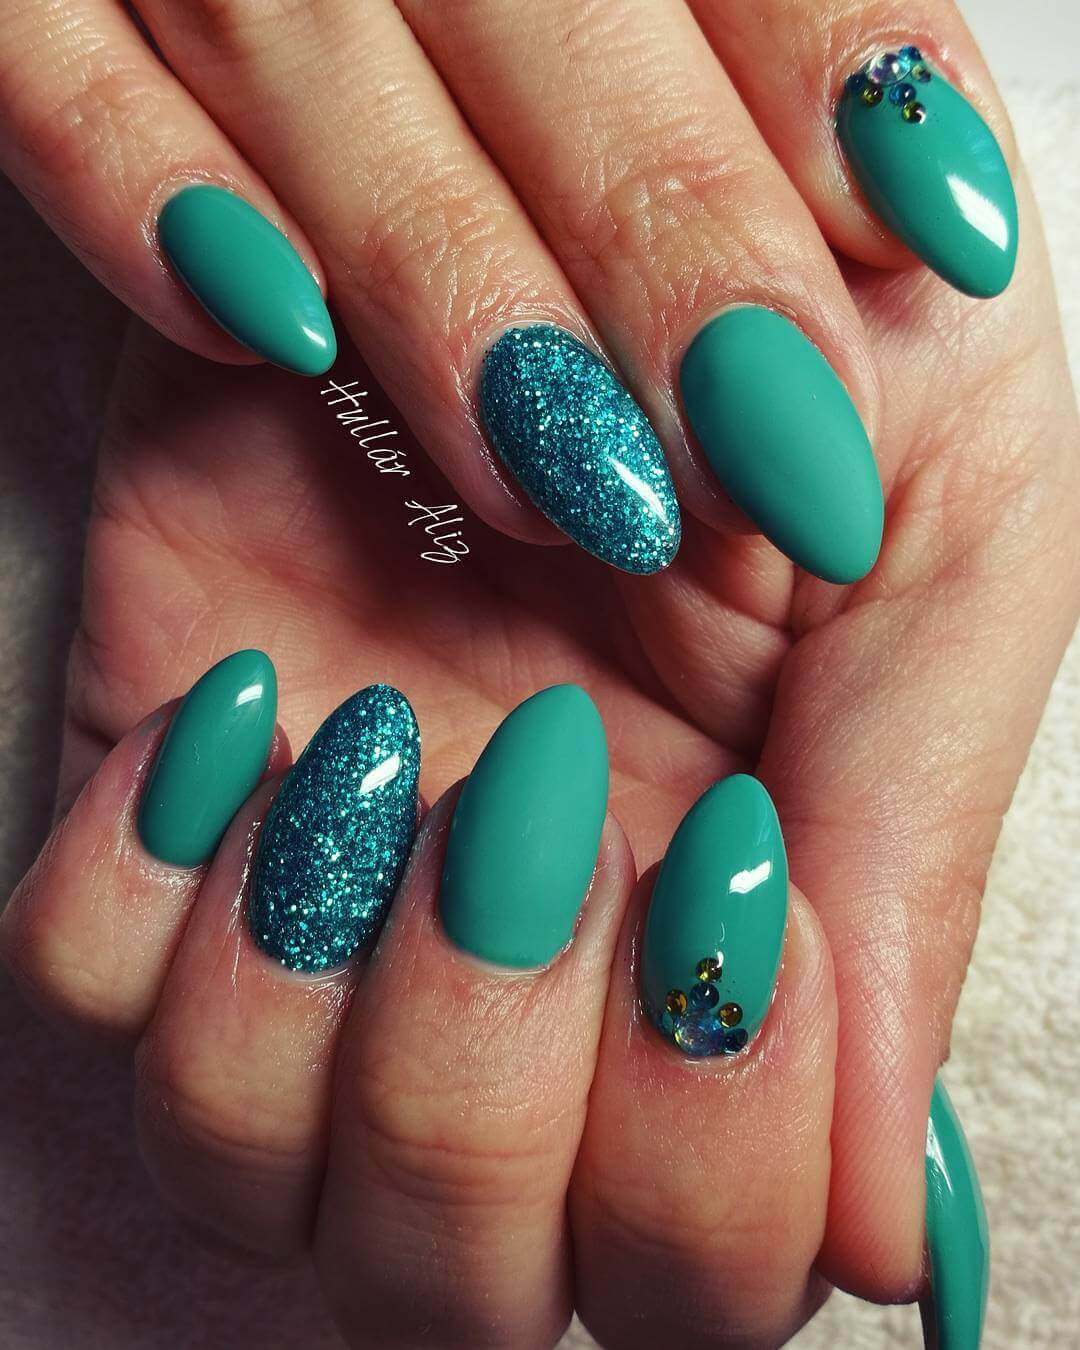 Green Nail art Inspire with these designs 2018 - Fashionre